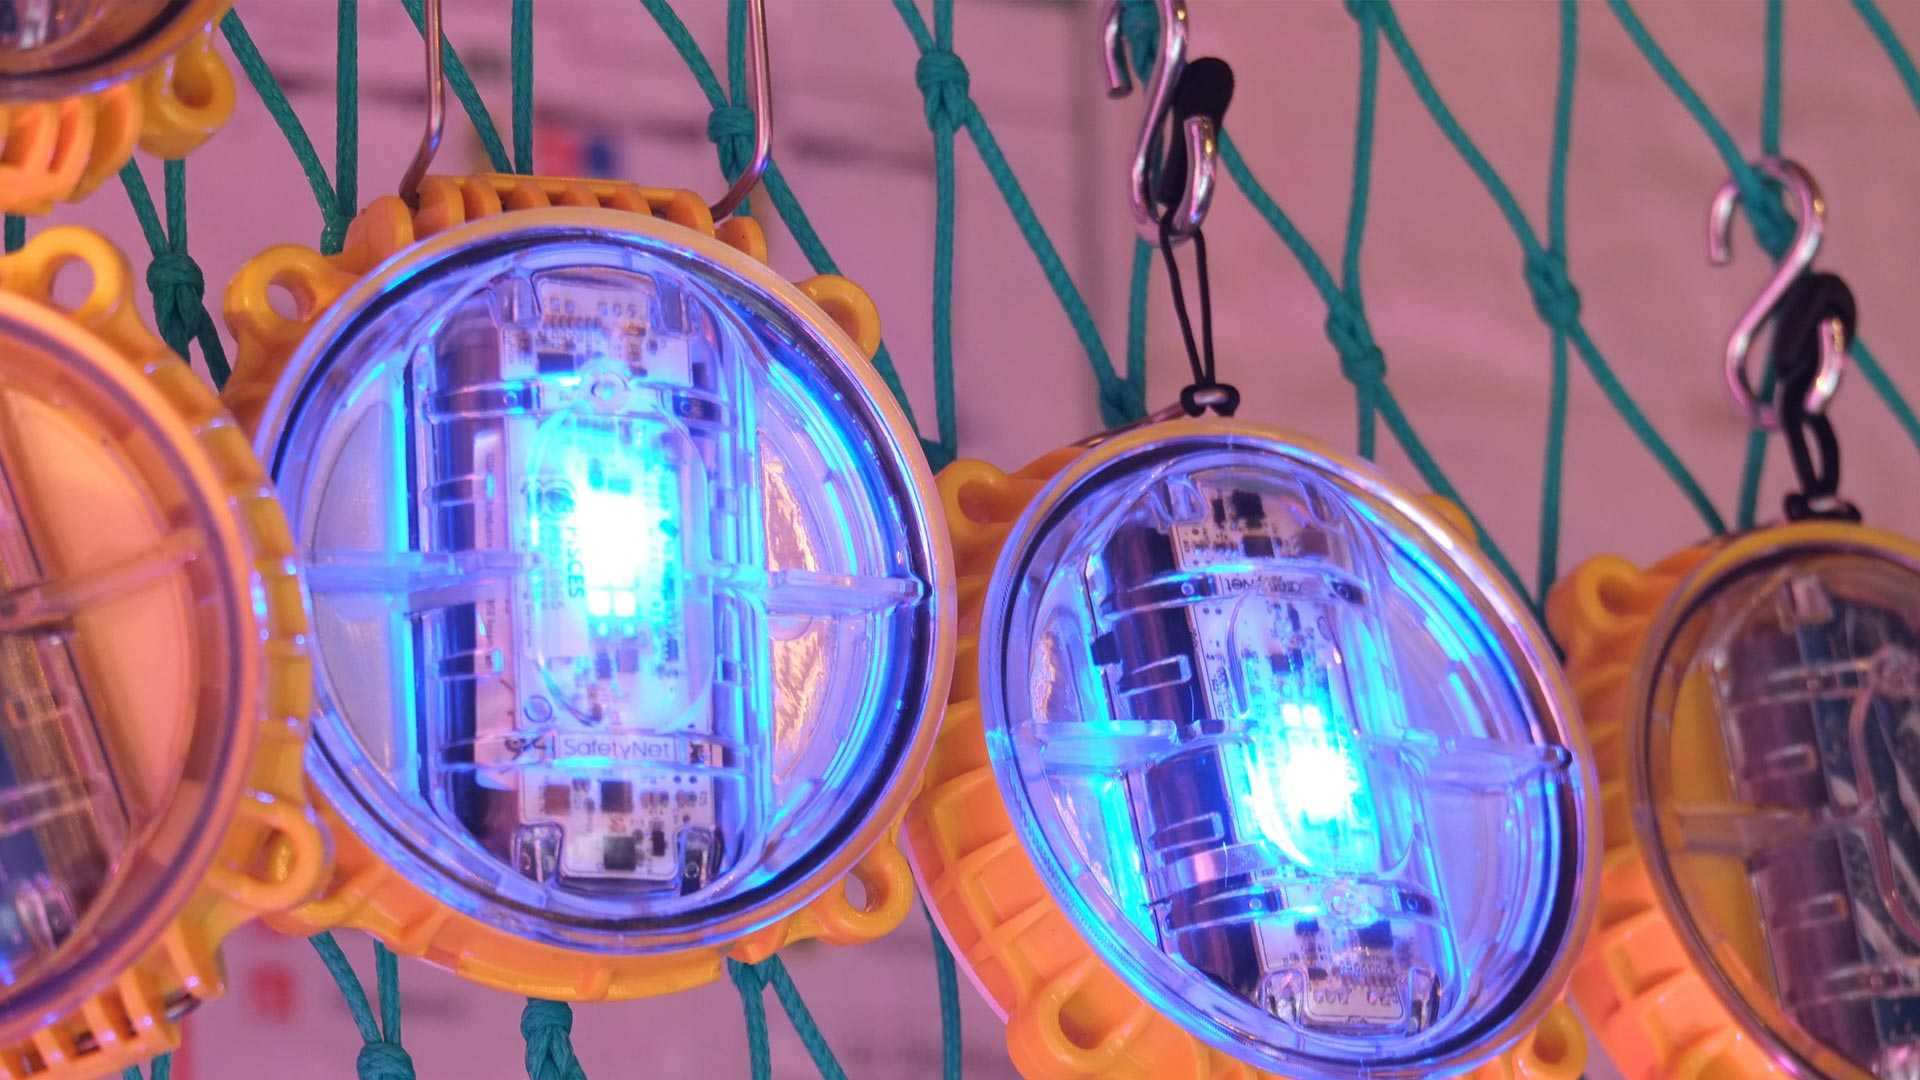 Light-emitting device called 'Pisces' used by fisherment to prevent bycatch